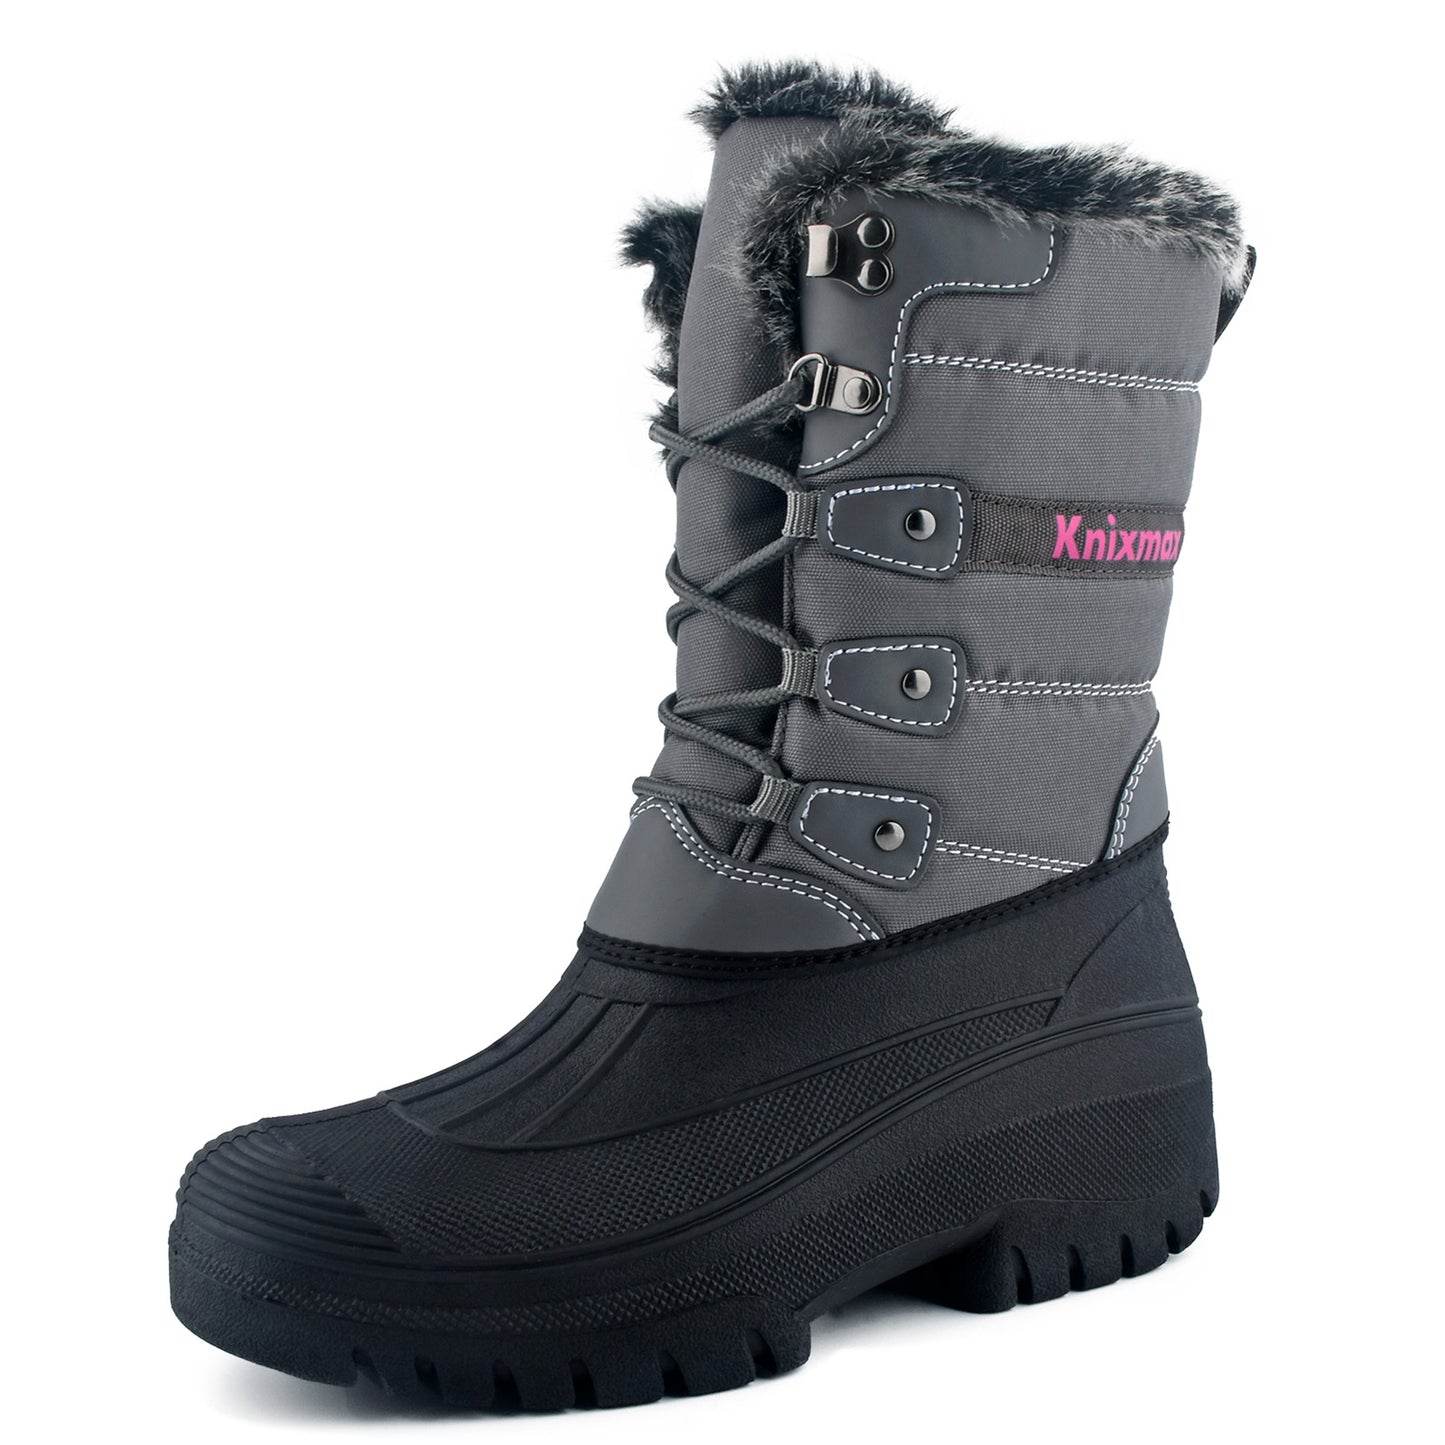 Knixmax Women's Snow Boots Grey Waterproof Sole Fur Lined Winter Boots(Upgraded Version)